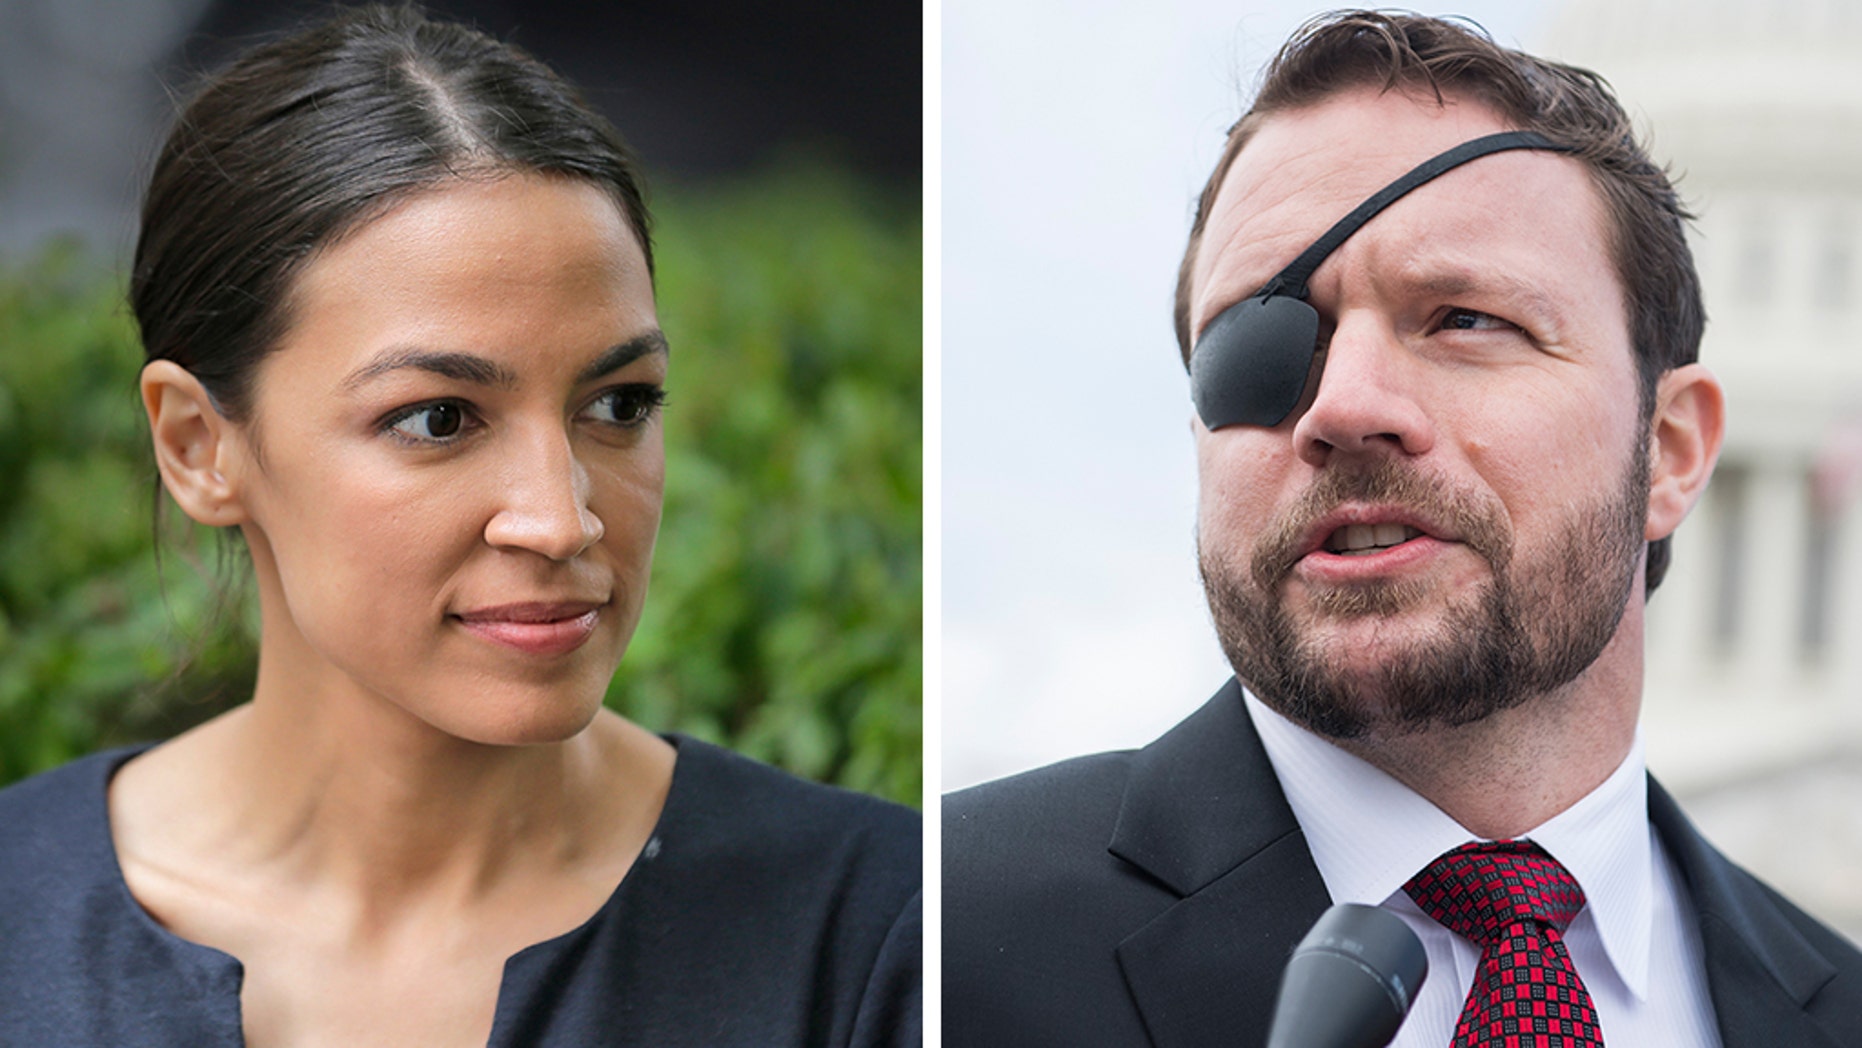 Crenshaw, Ocasio-Cortez trade Twitter barbs over Super Bowl, Kaepernick, tax rate on wealthy